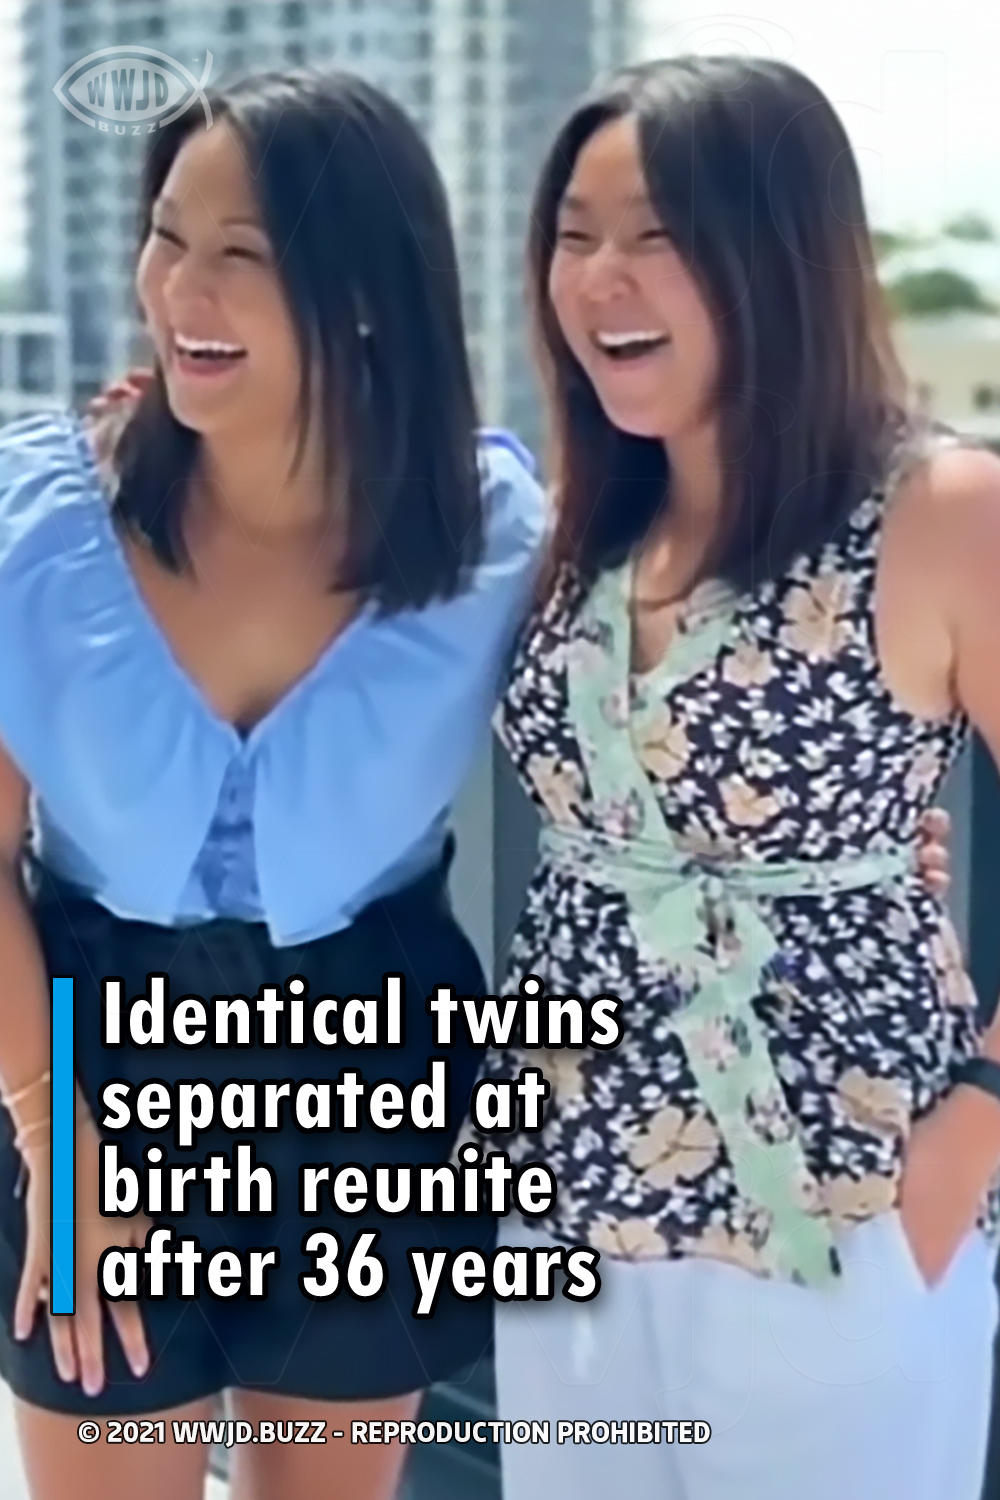 Identical twins separated at birth reunite after 36 years